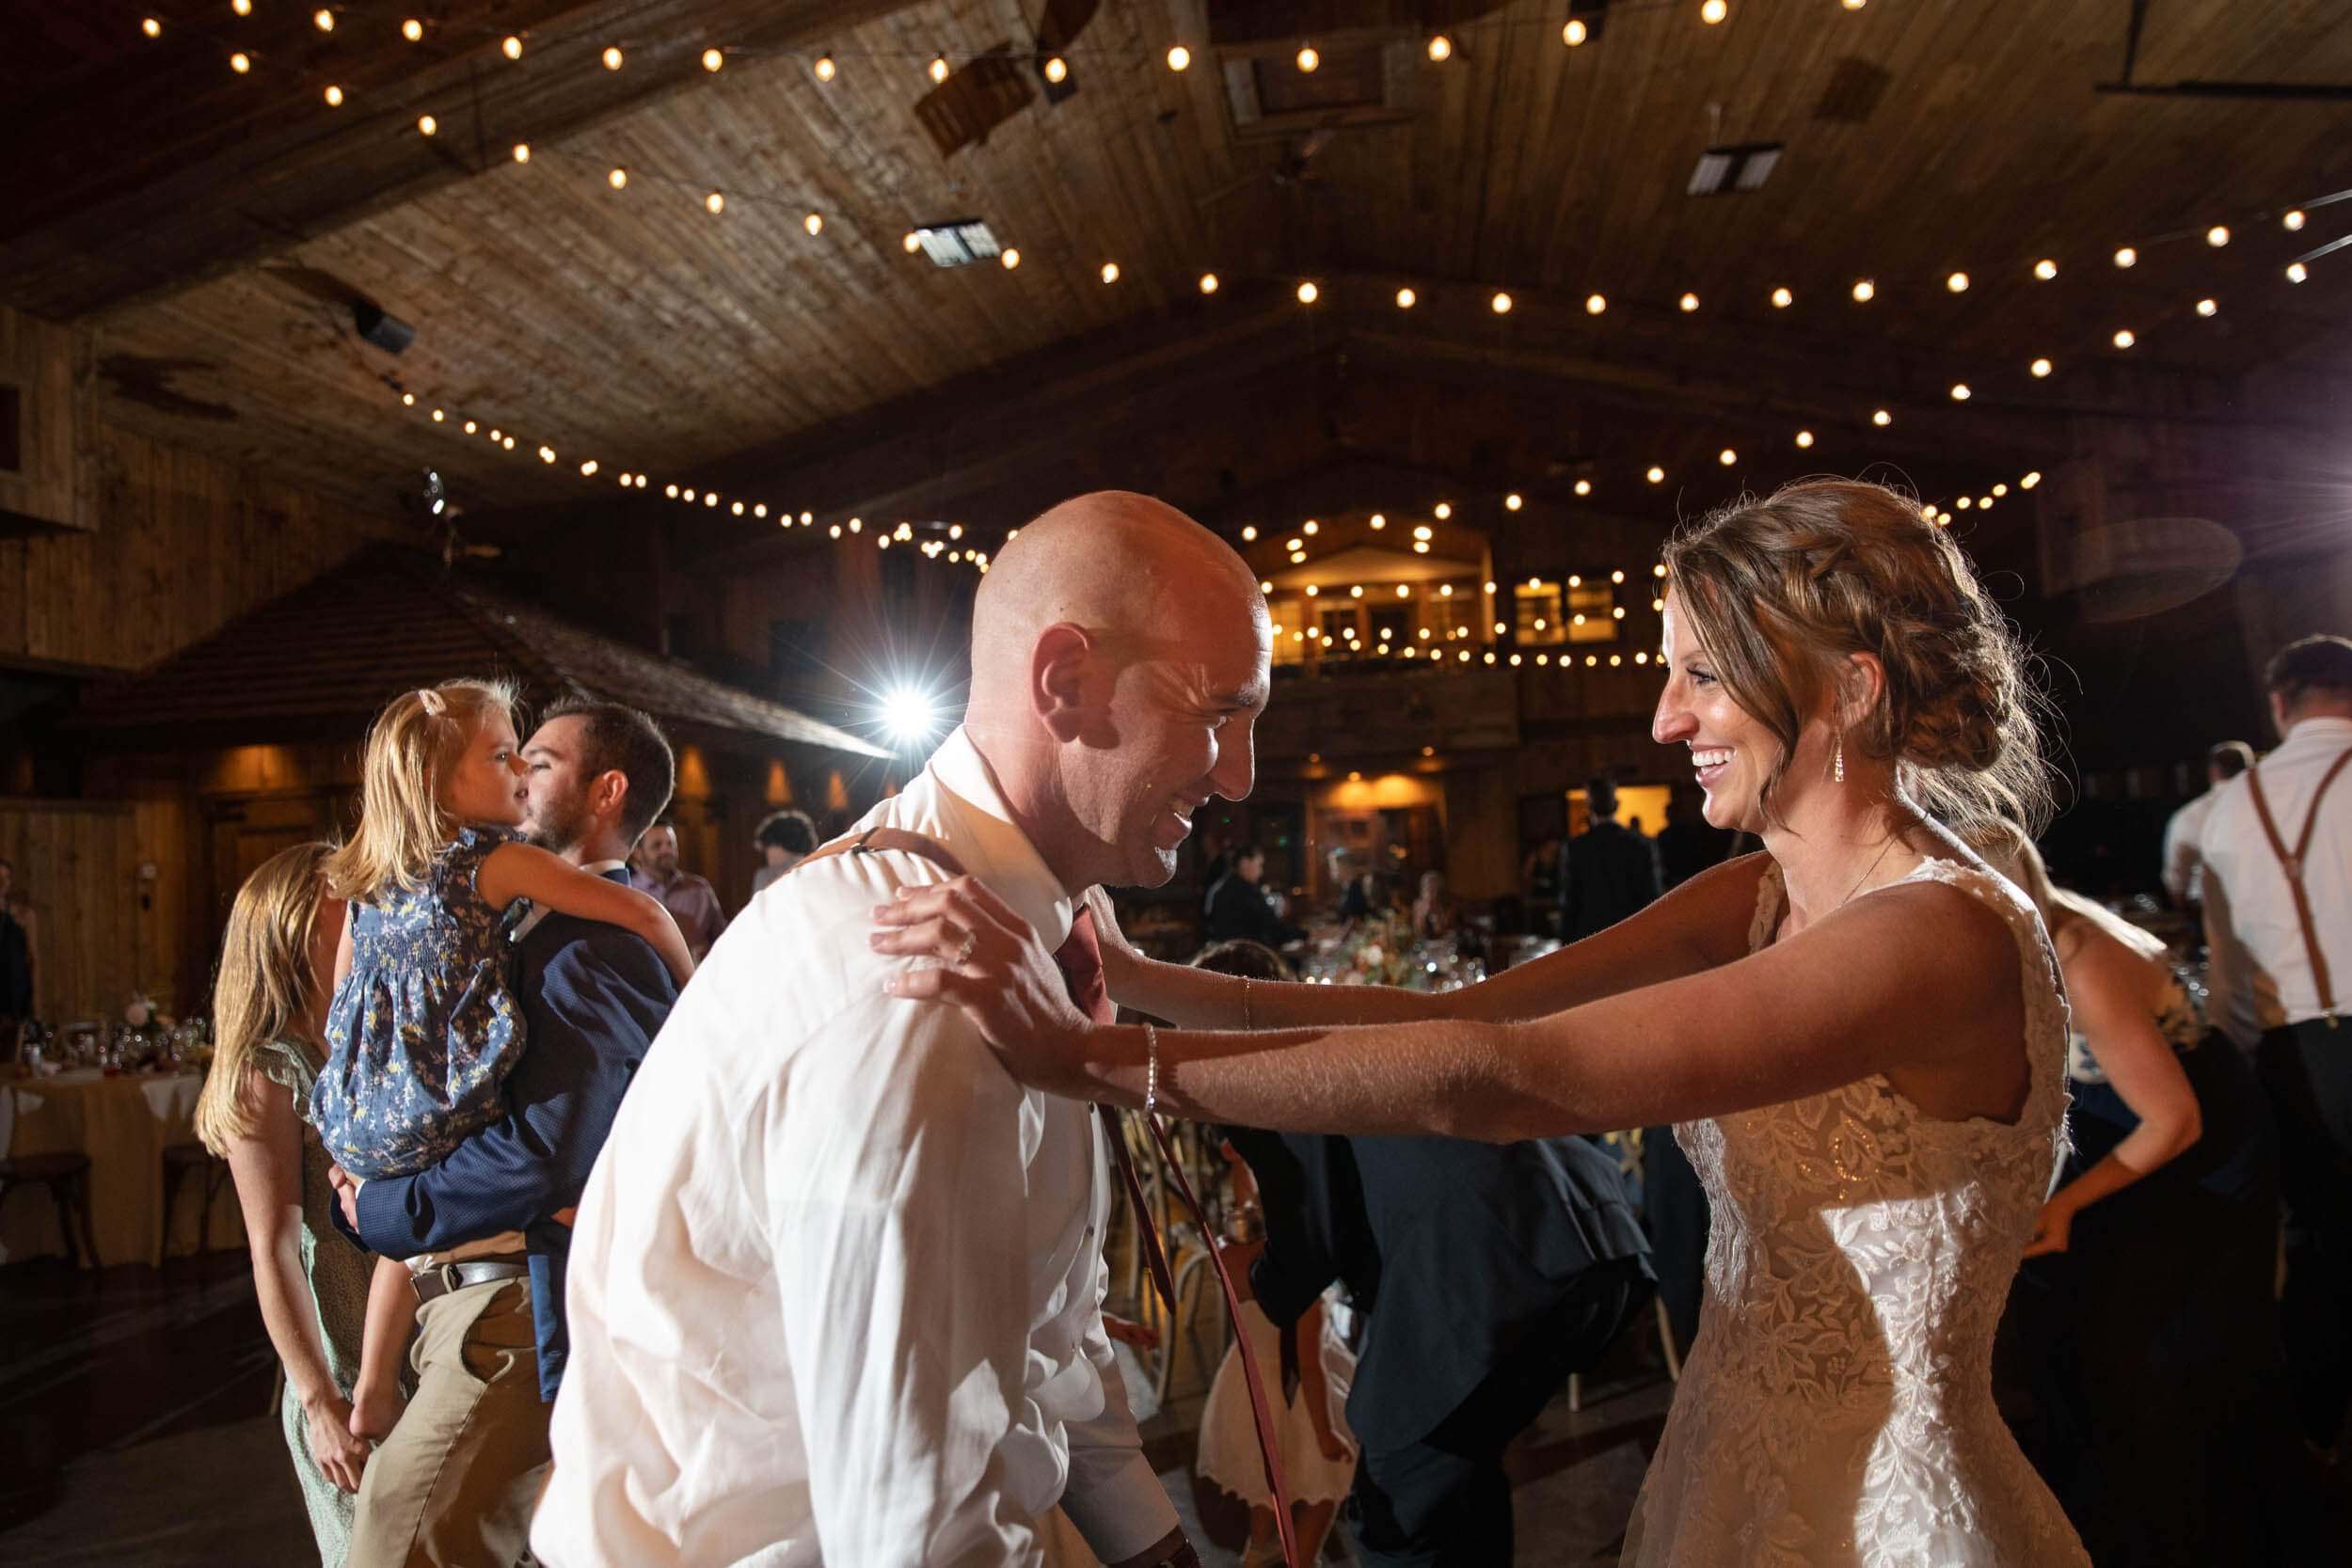 Dancing photography at Spruce Mountain Ranch